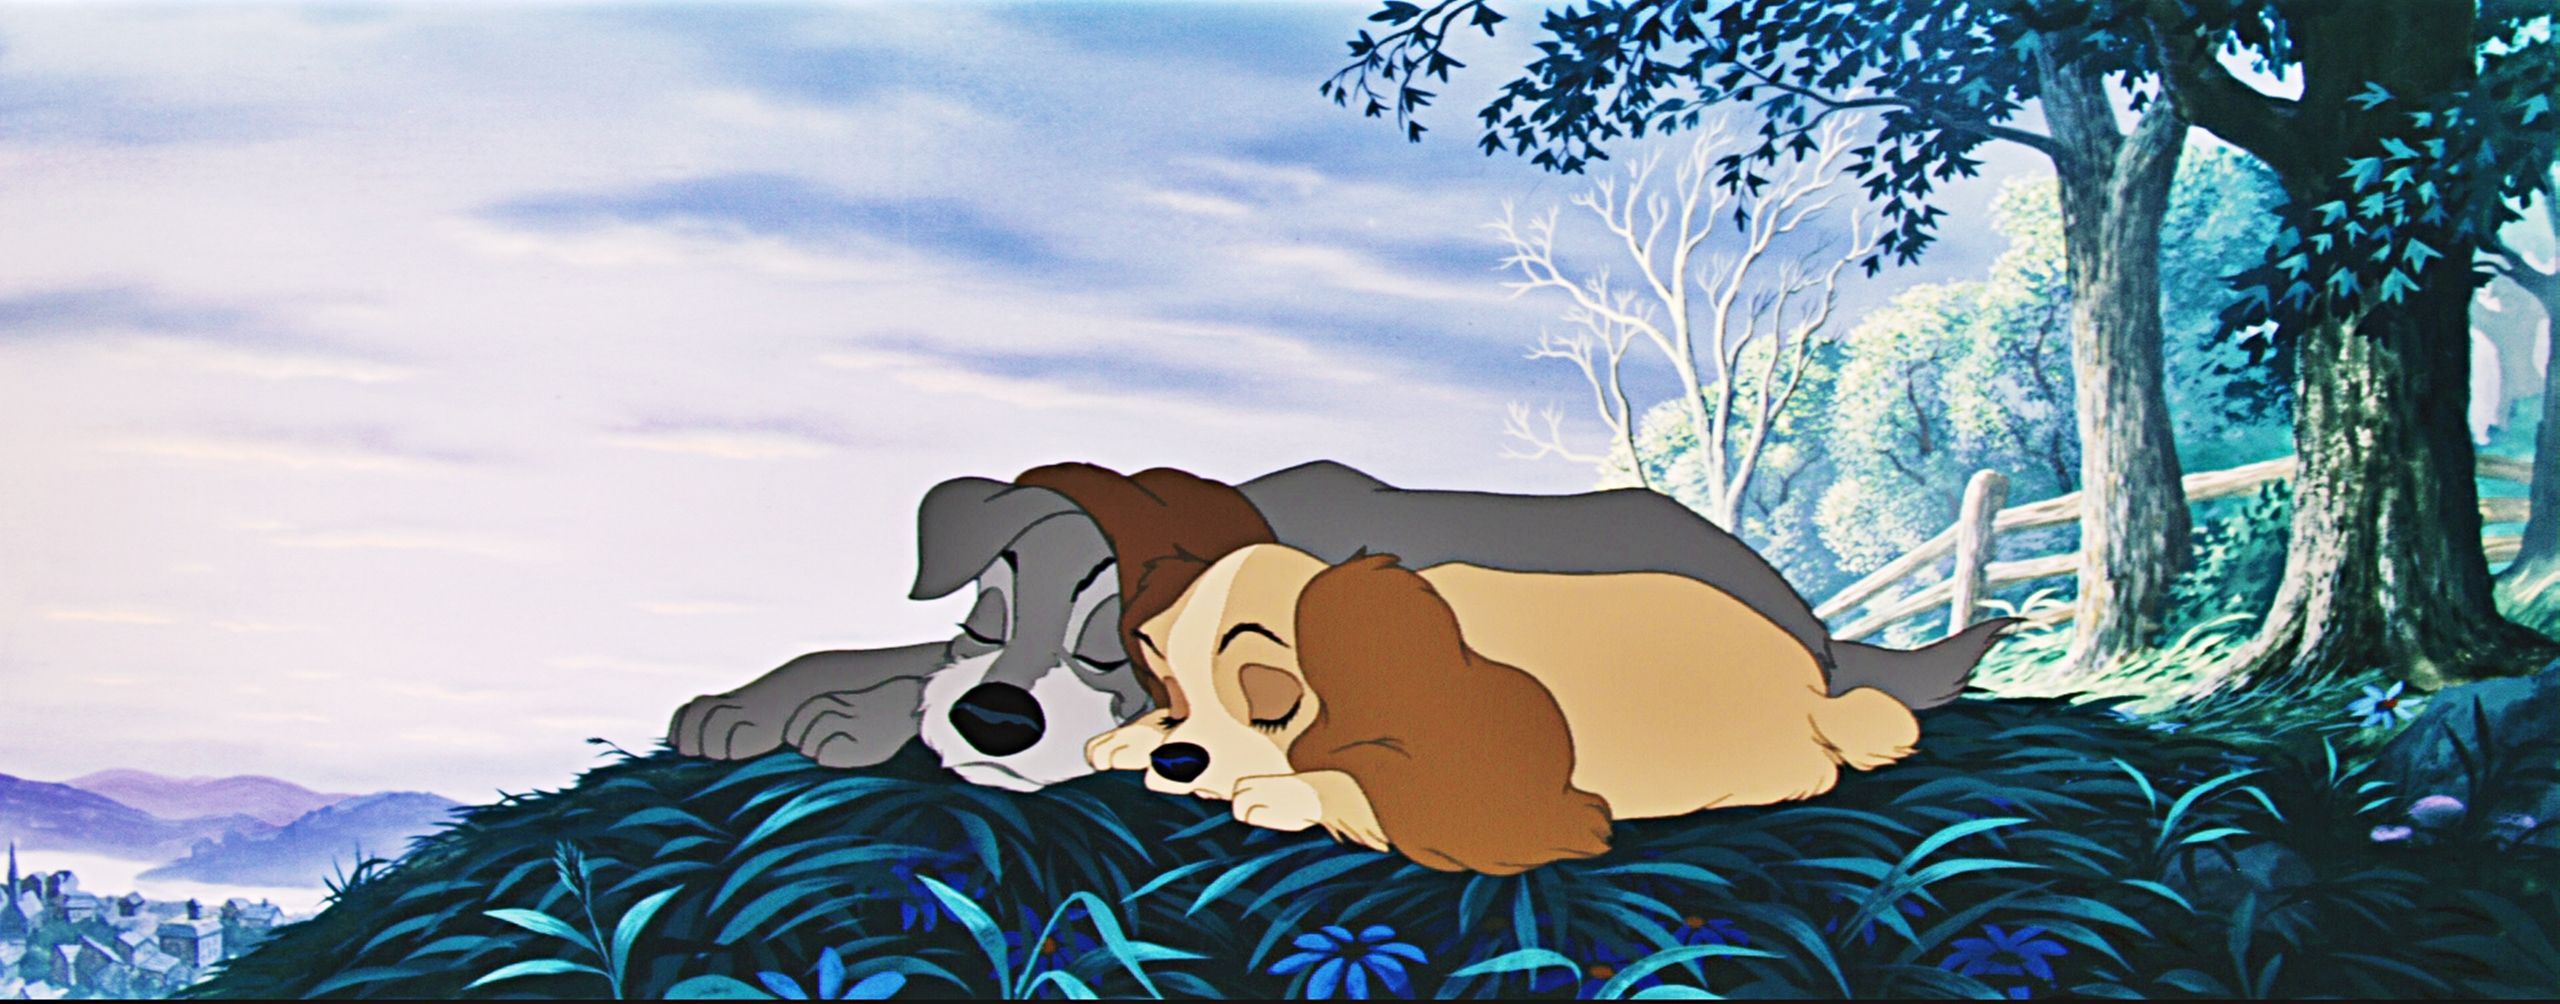 Lady and the Tramp Desktop Background